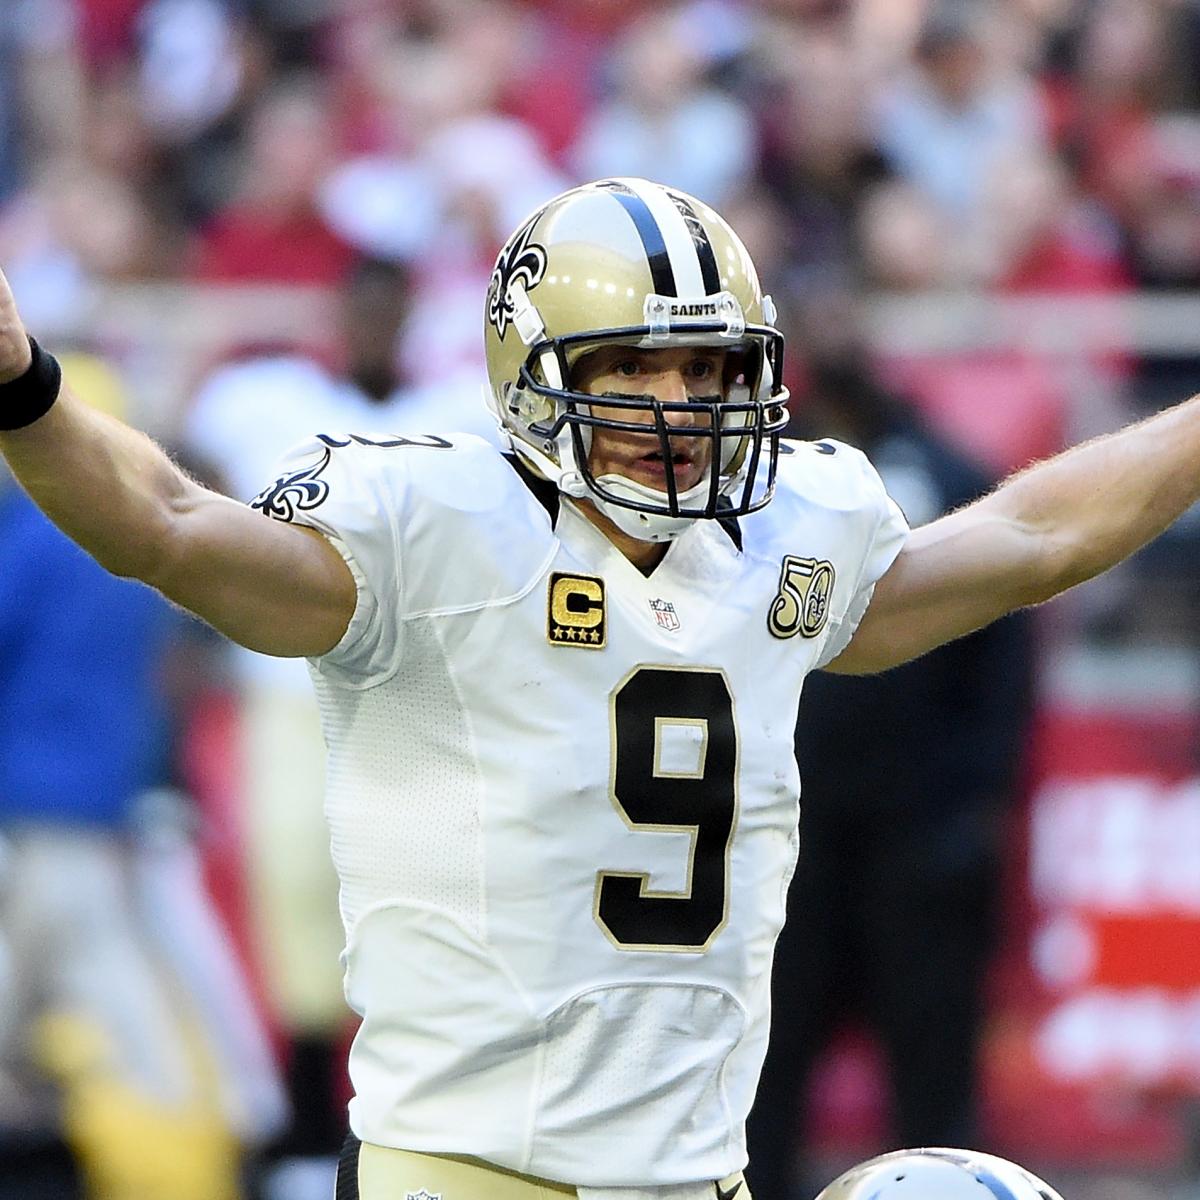 2017 New Orleans Saints Schedule: Full Listing of Dates, Times and ... - Bleacher Report